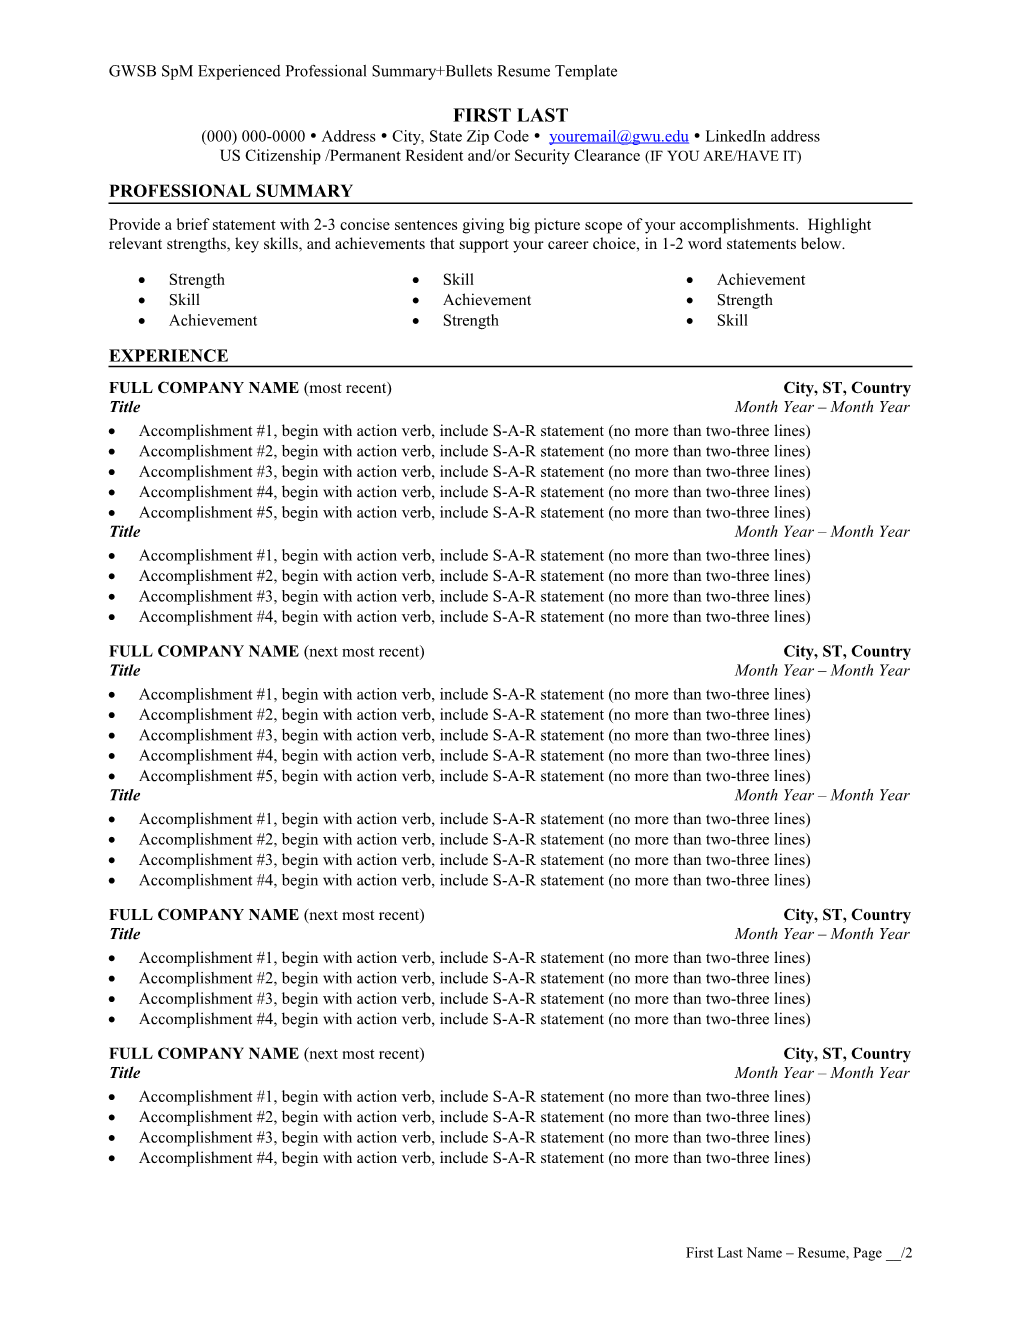 GWSB Spm Experienced Professionalsummary+Bullets Resume Template